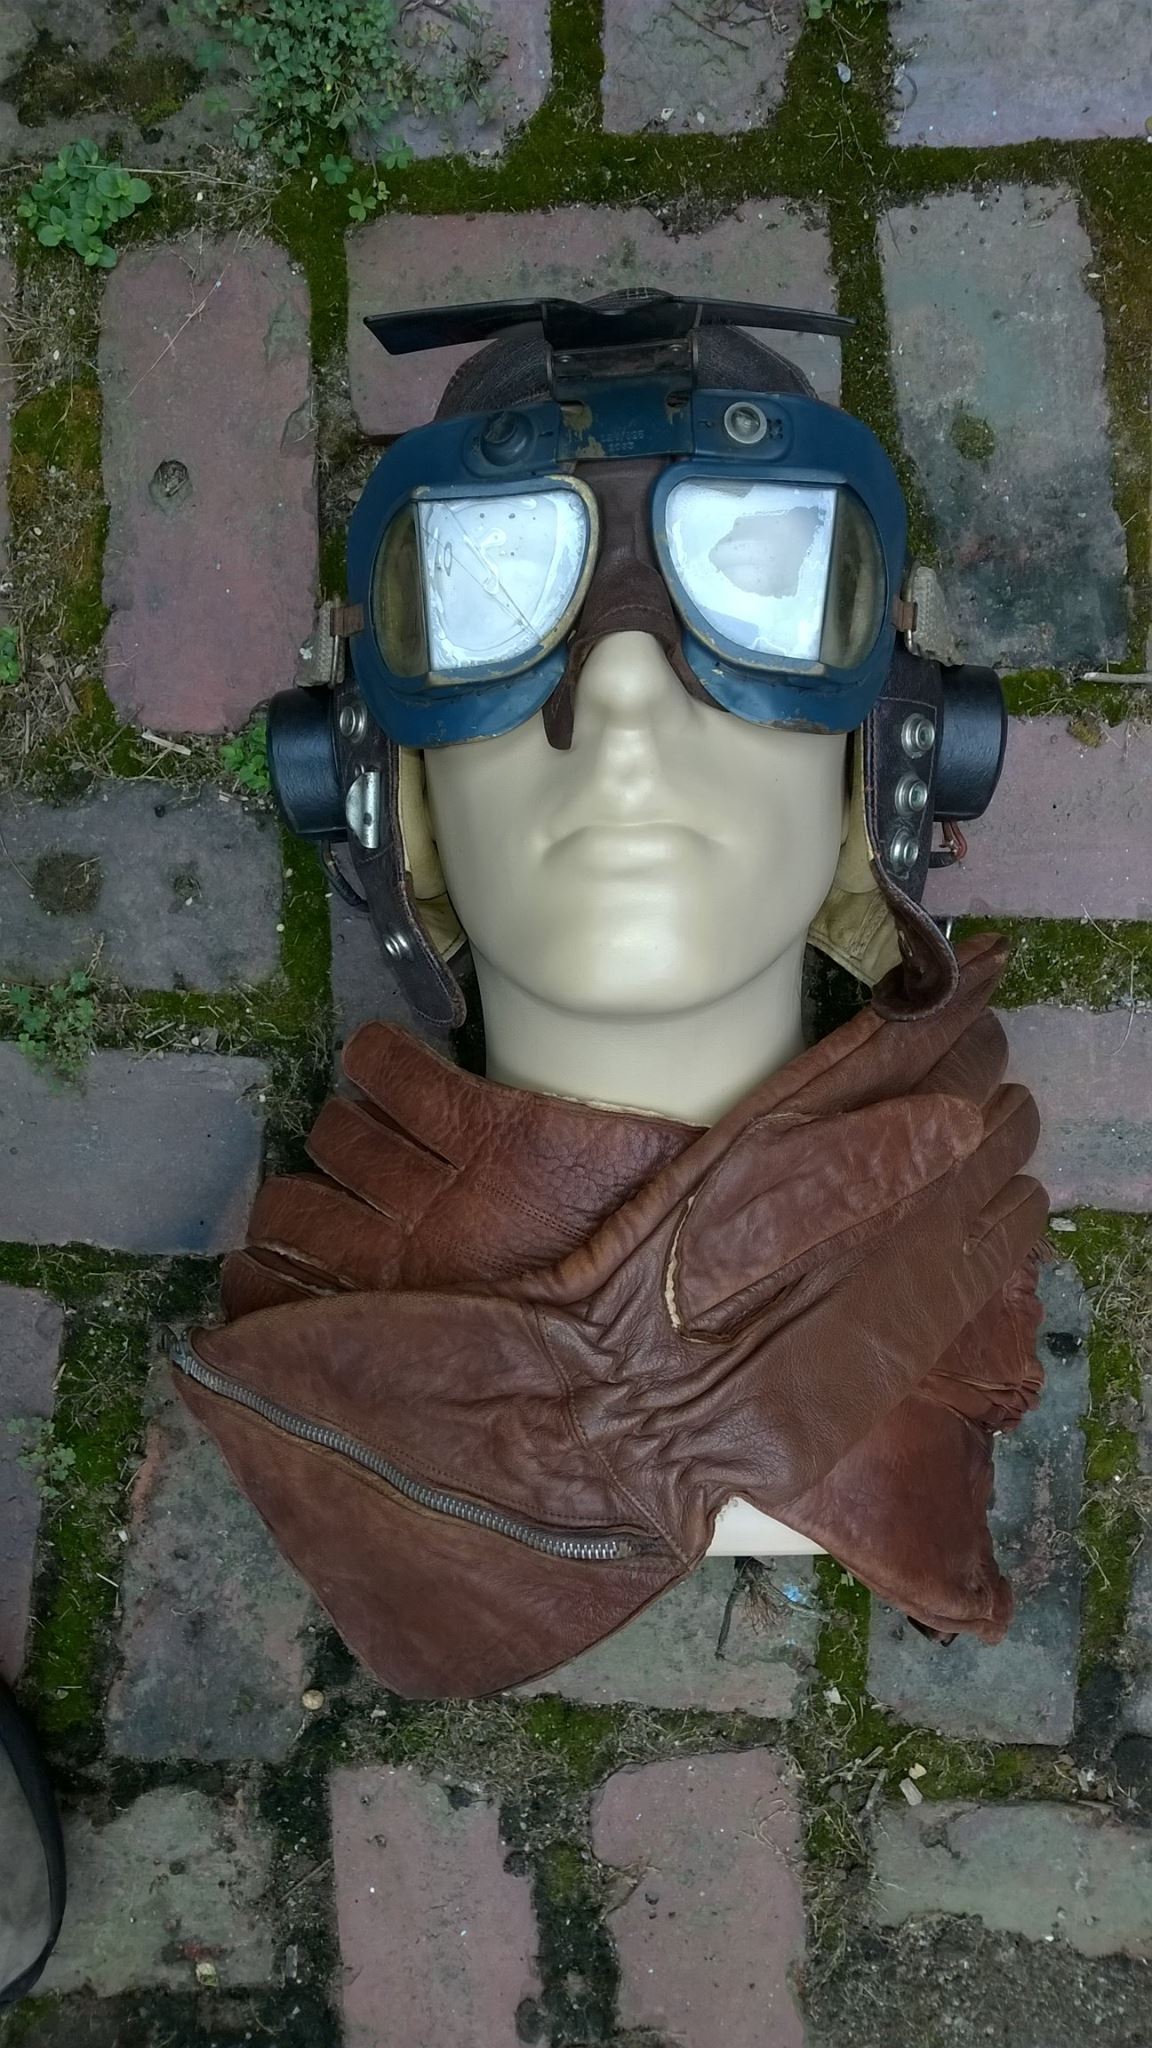 Helmet, Goggles and Gloves